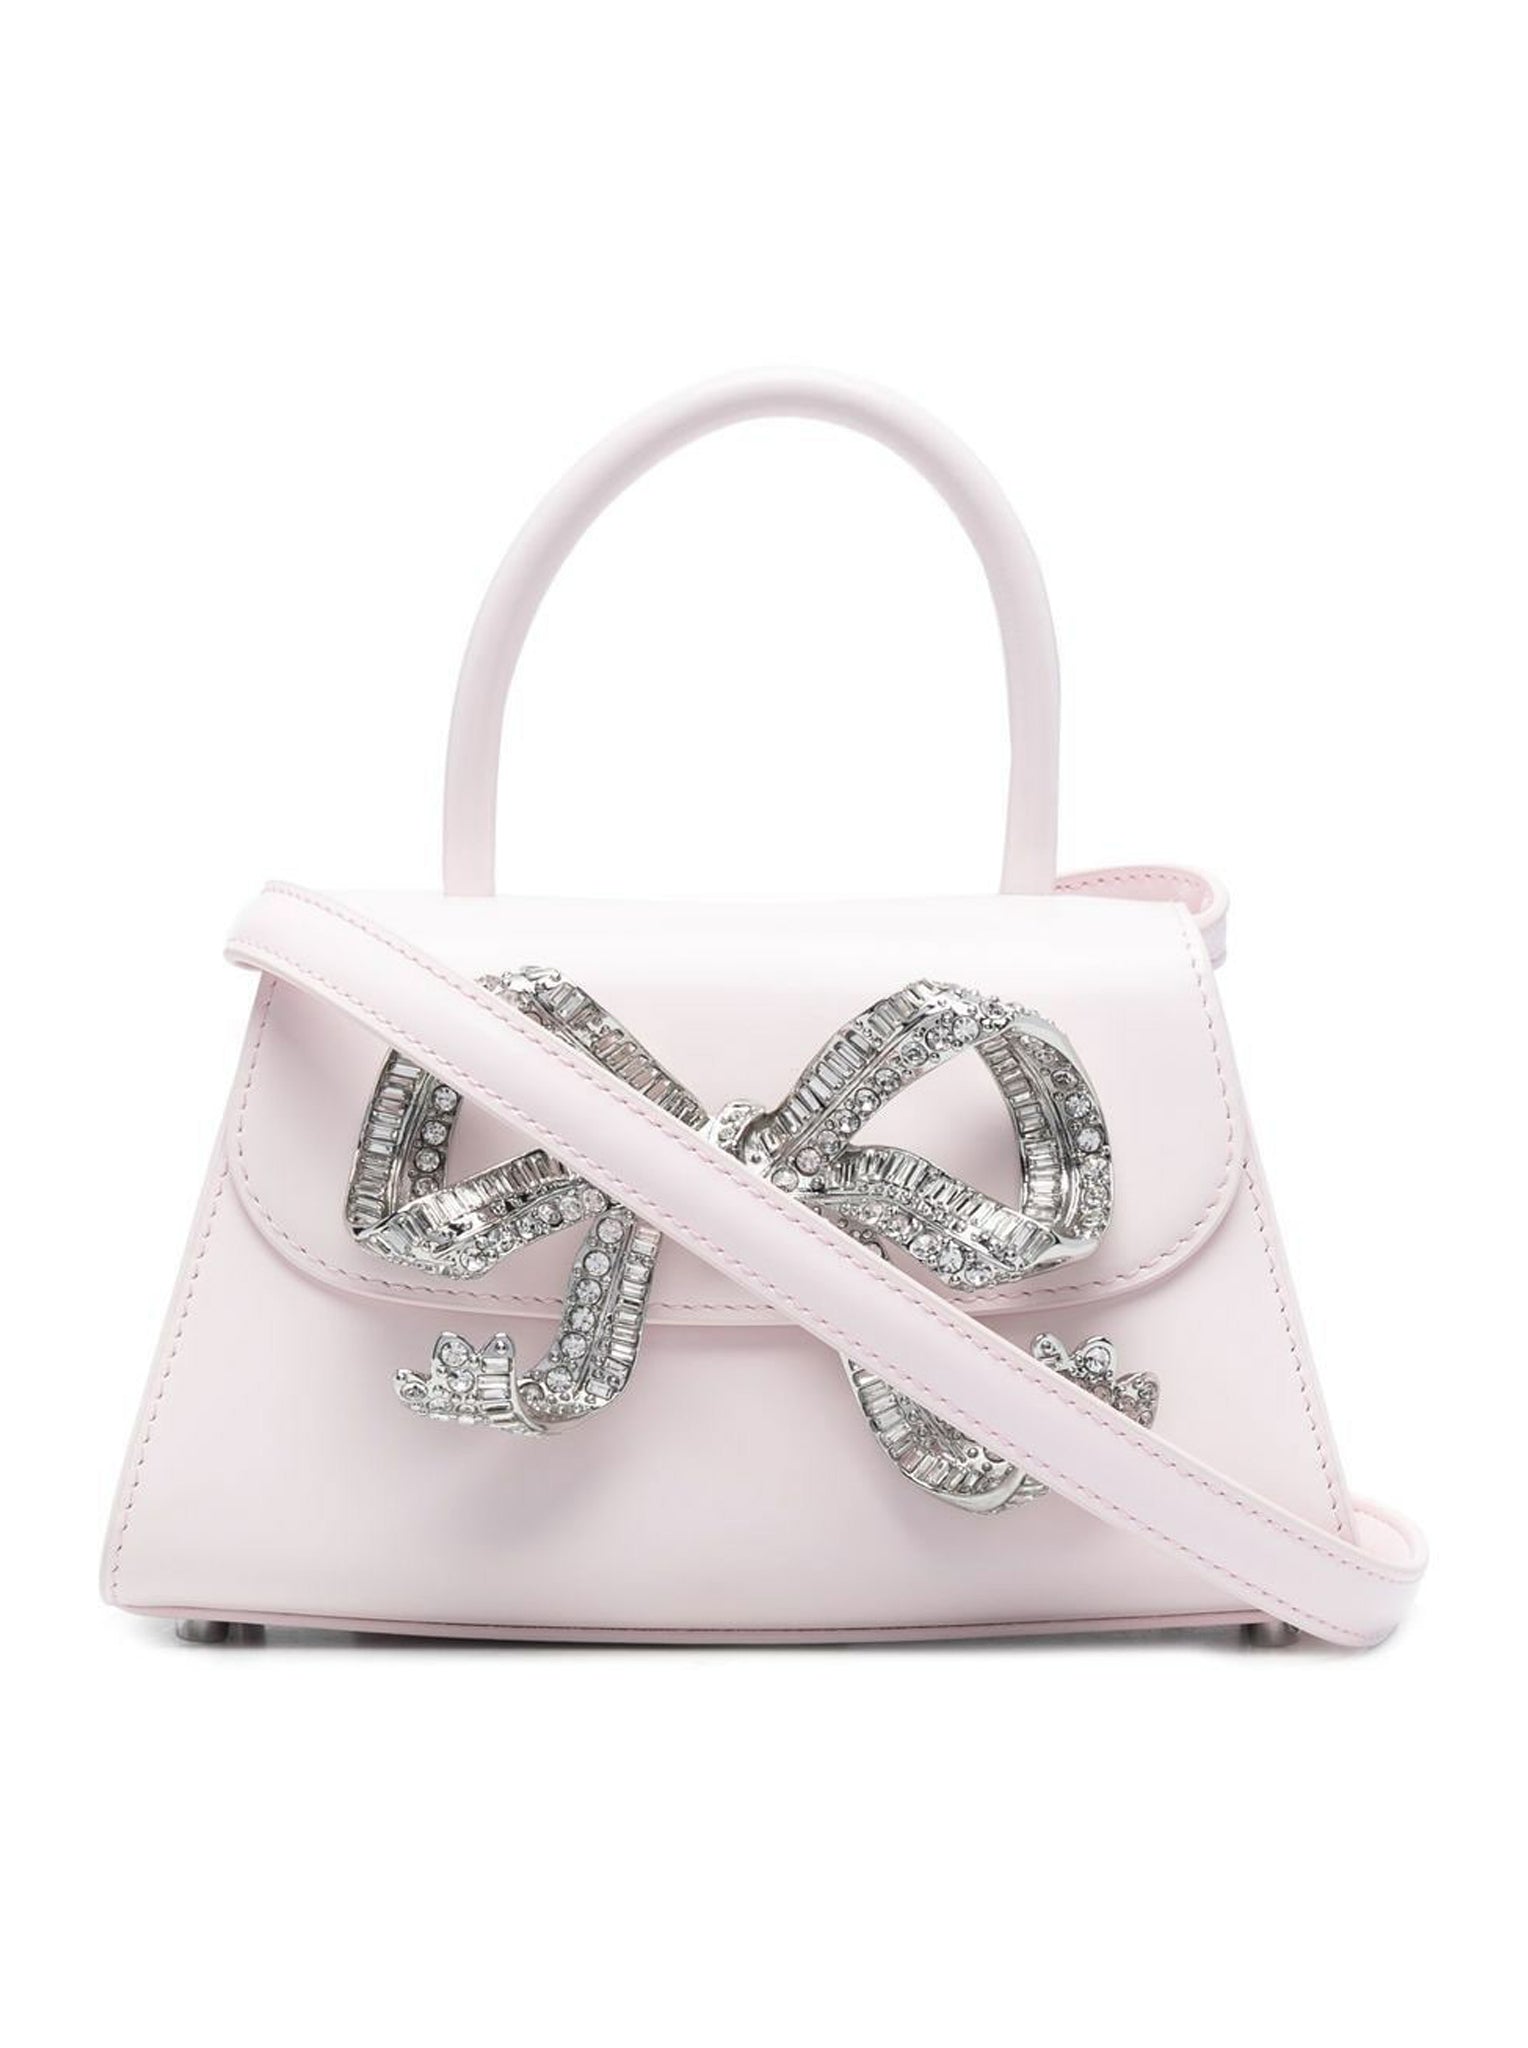 bow-embellished tote